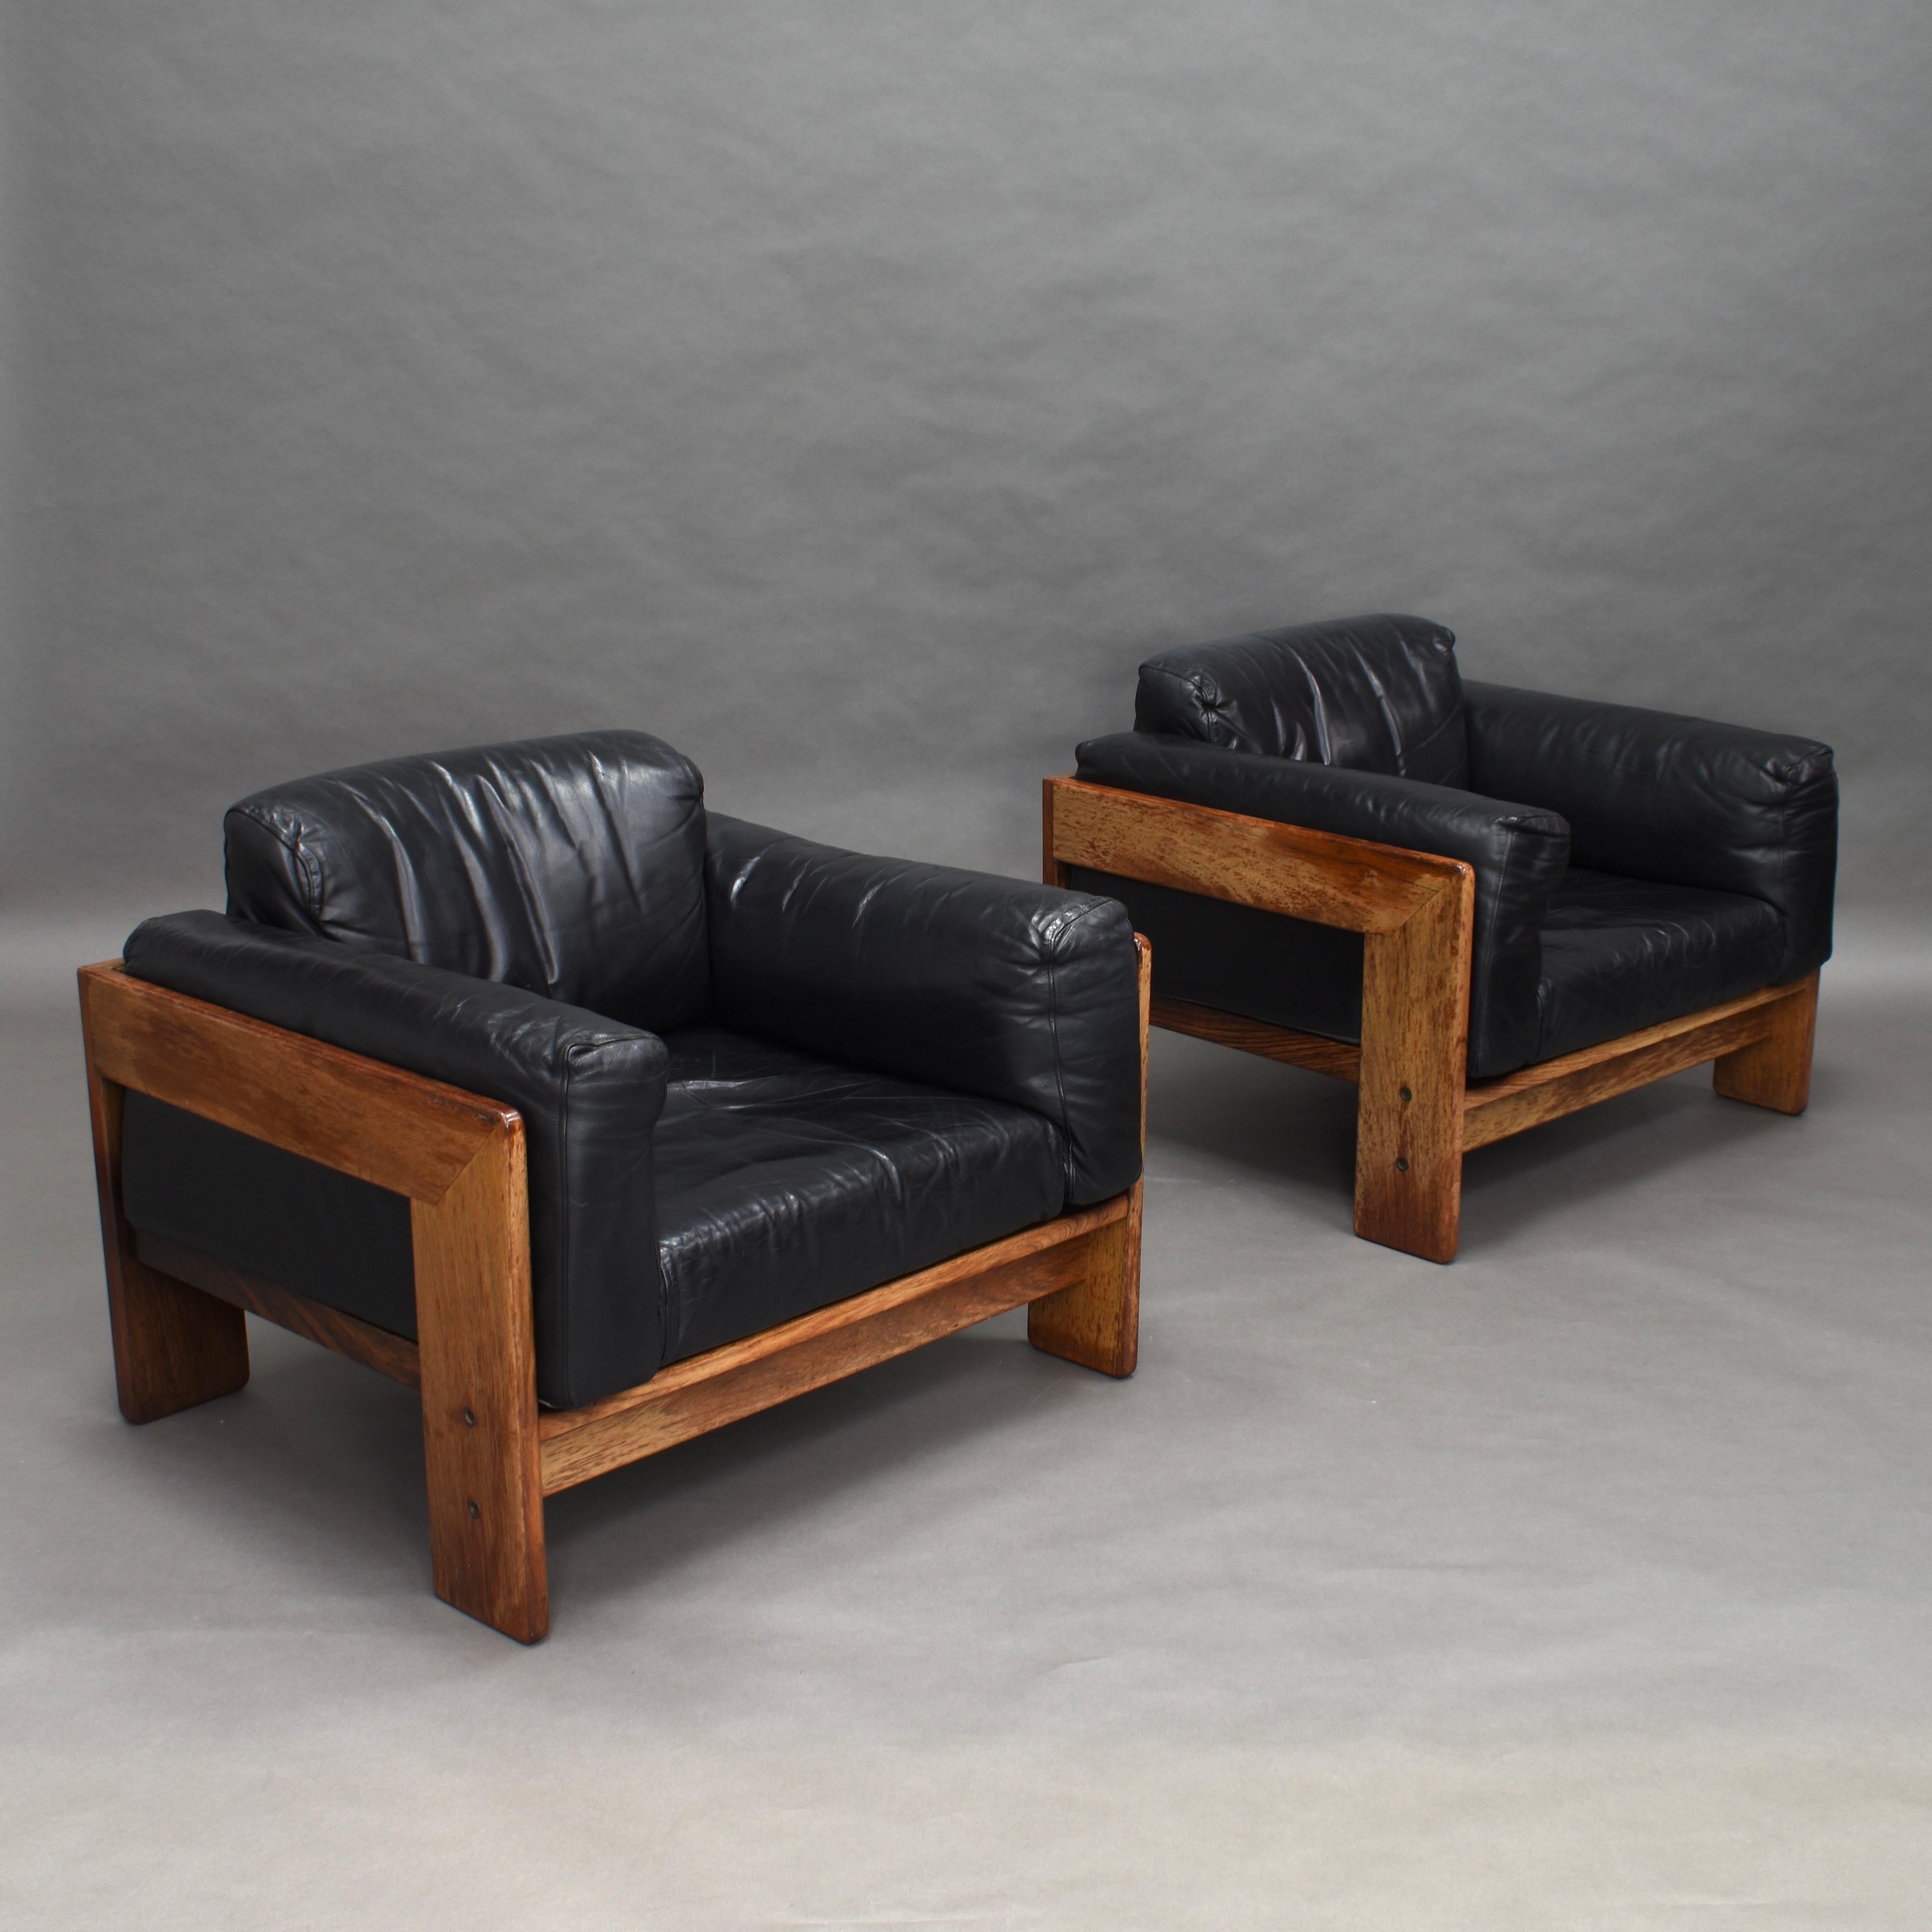 Pair of leather lounge chairs in Brazilian Rosewood (Rio Palissander) and black leather by Afra and Tobia Scarpa for KNOLL – Italy, 1975.

Designer: Afra and Tobia Scarpa

Manufacturer: KNOLL

Country: Italy

Model: Bastiano lounge club